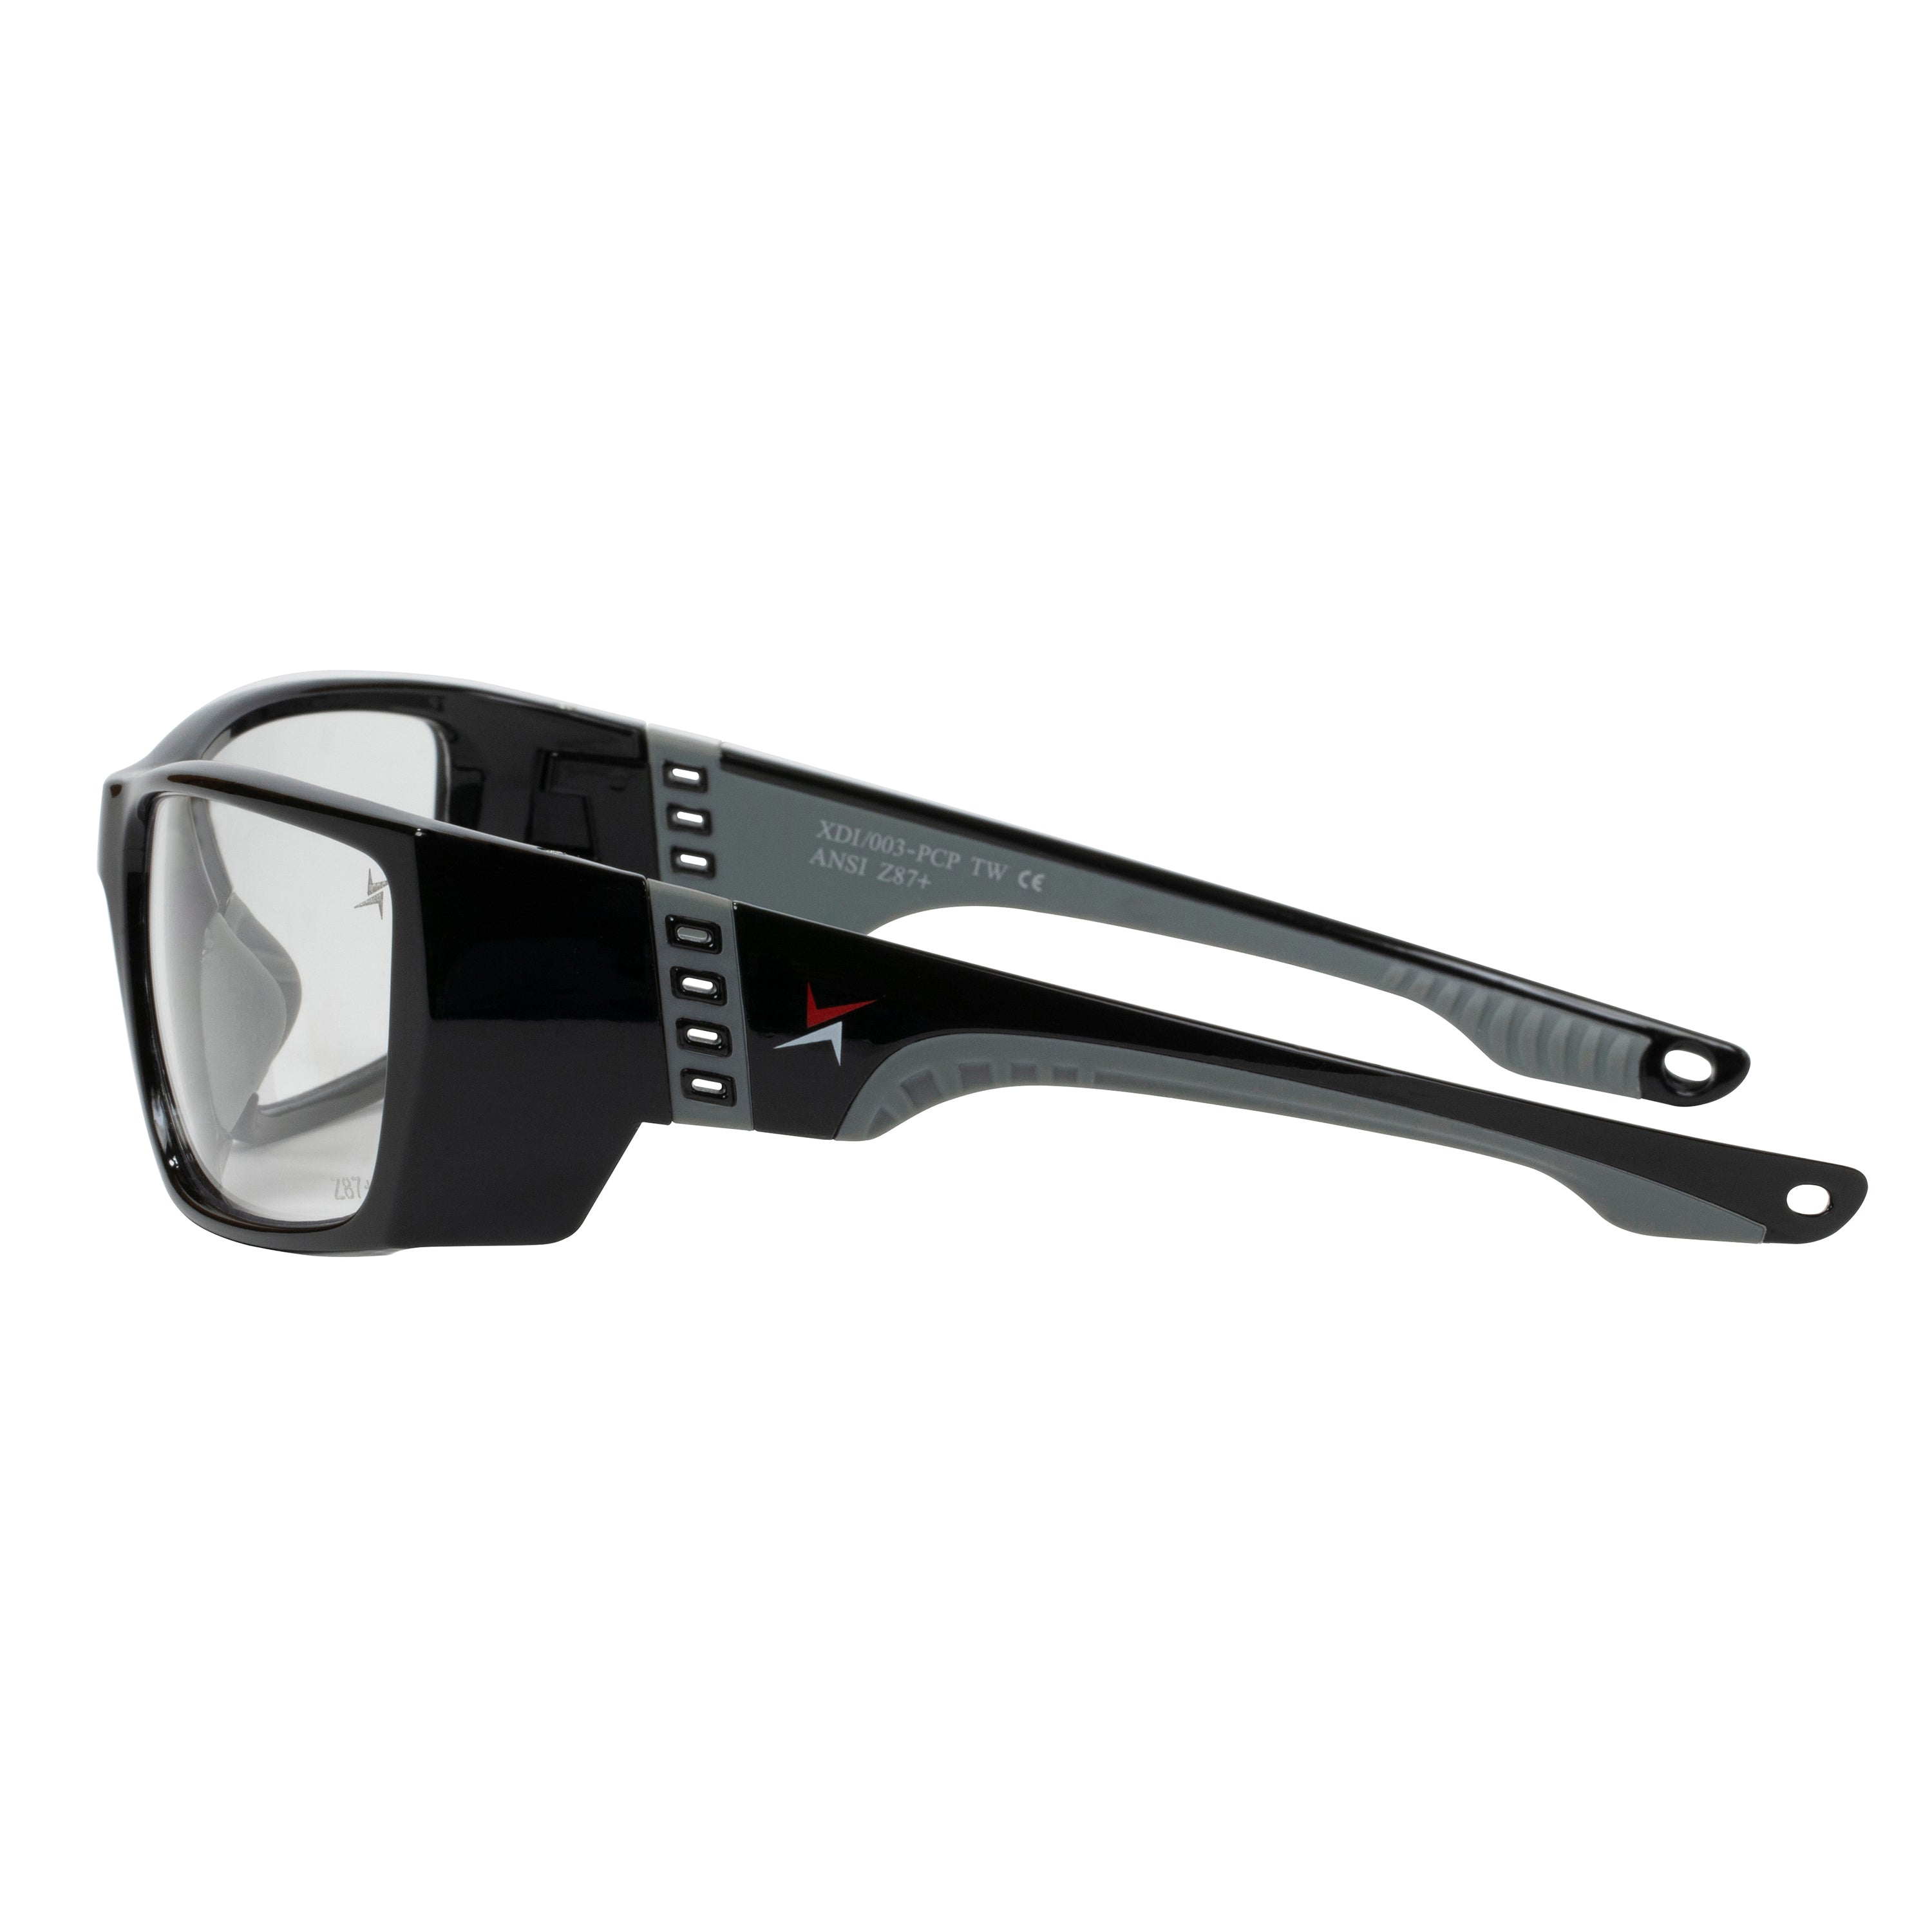 Clear Lens Sport Safety Sunglasses with Grey Rubber Accents.